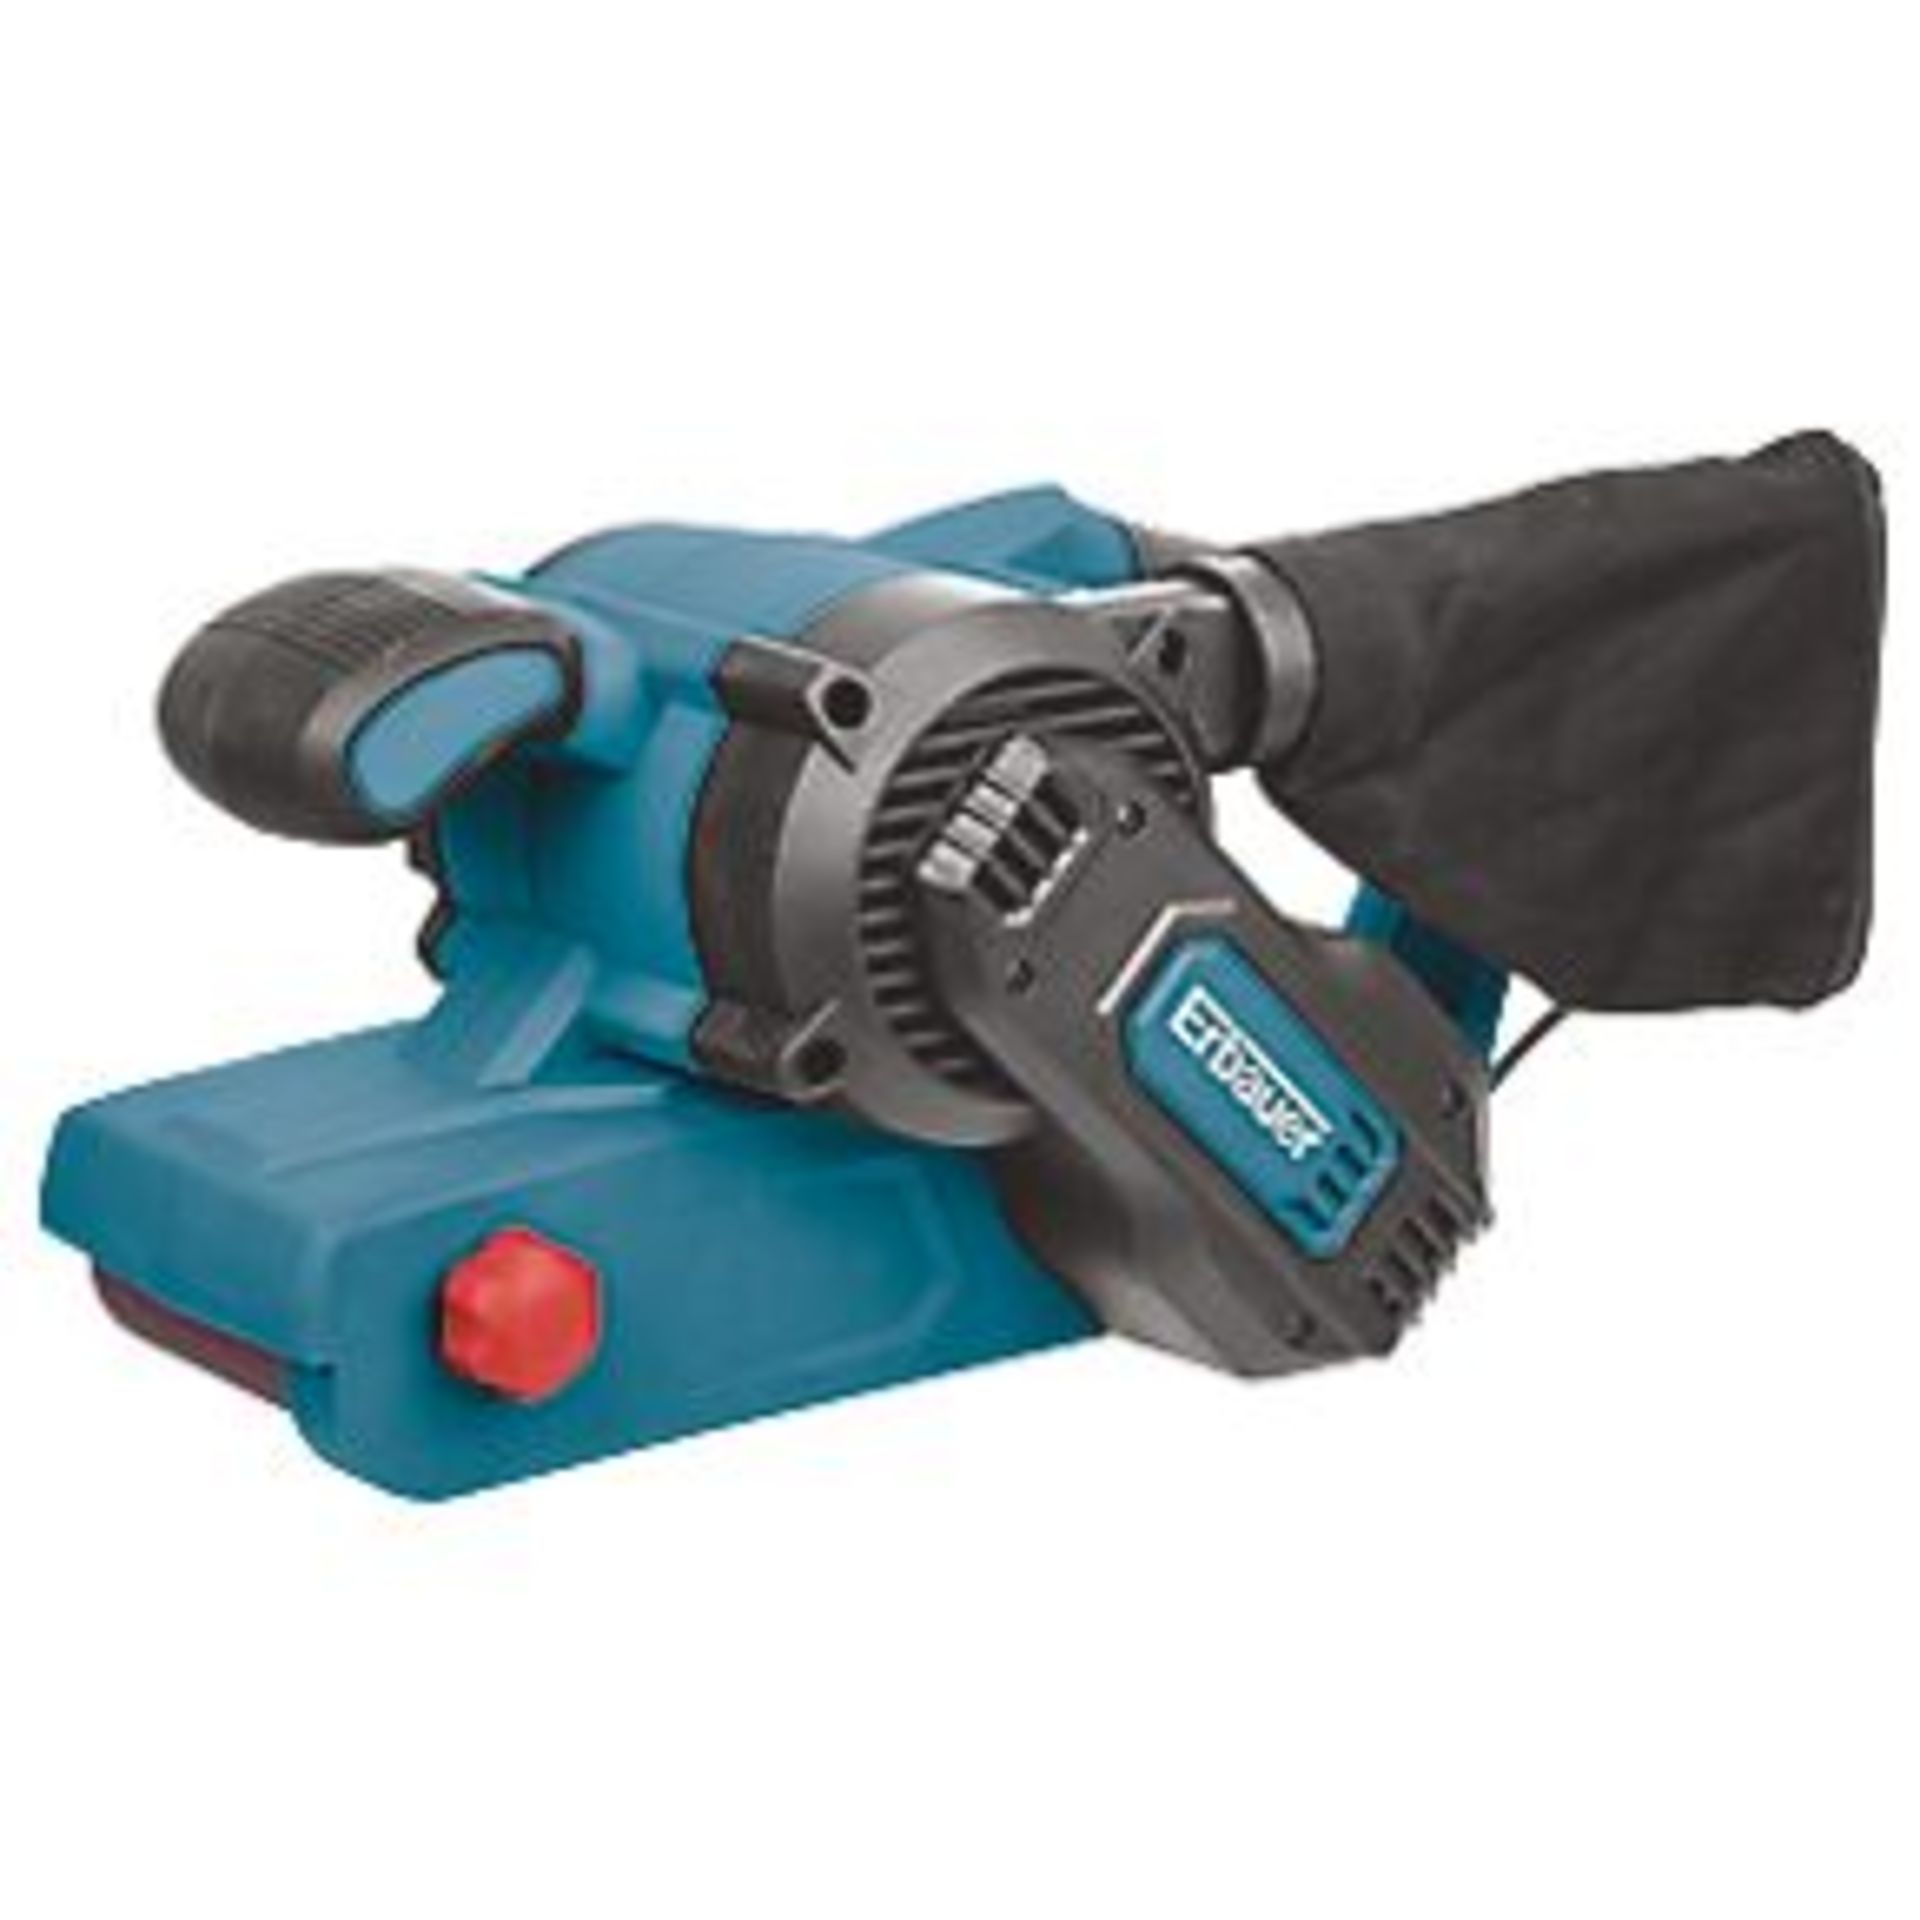 ERBAUER 950W EBS950 BELT SANDER RRP £69.99Condition ReportAppraisal Available on Request- All